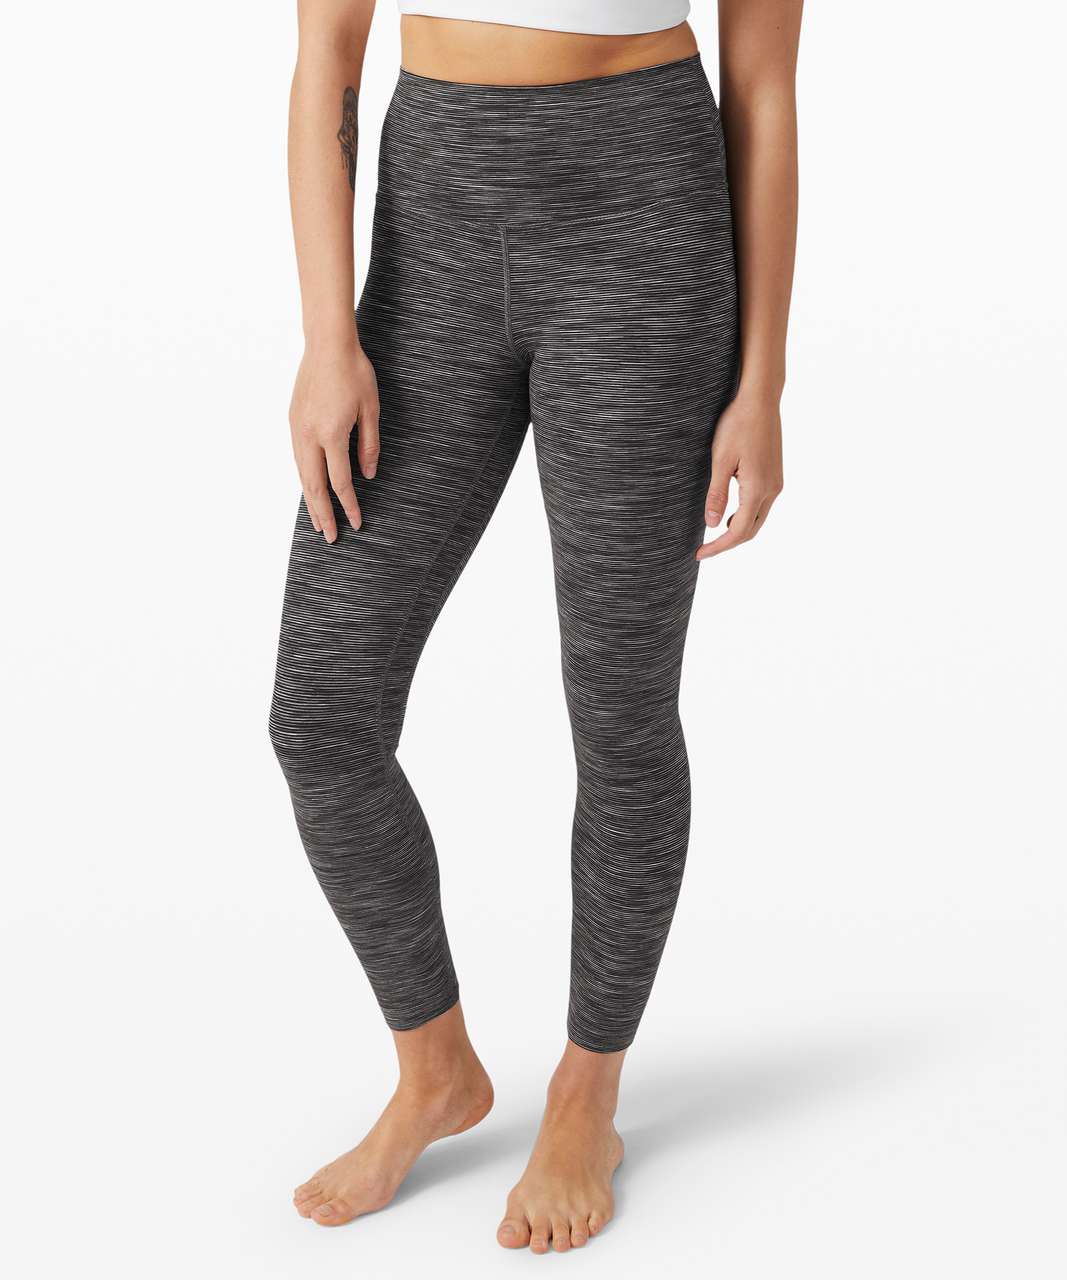 Lululemon Align™ Pant II 25" - Wee Are From Space Dark Carbon Ice Grey